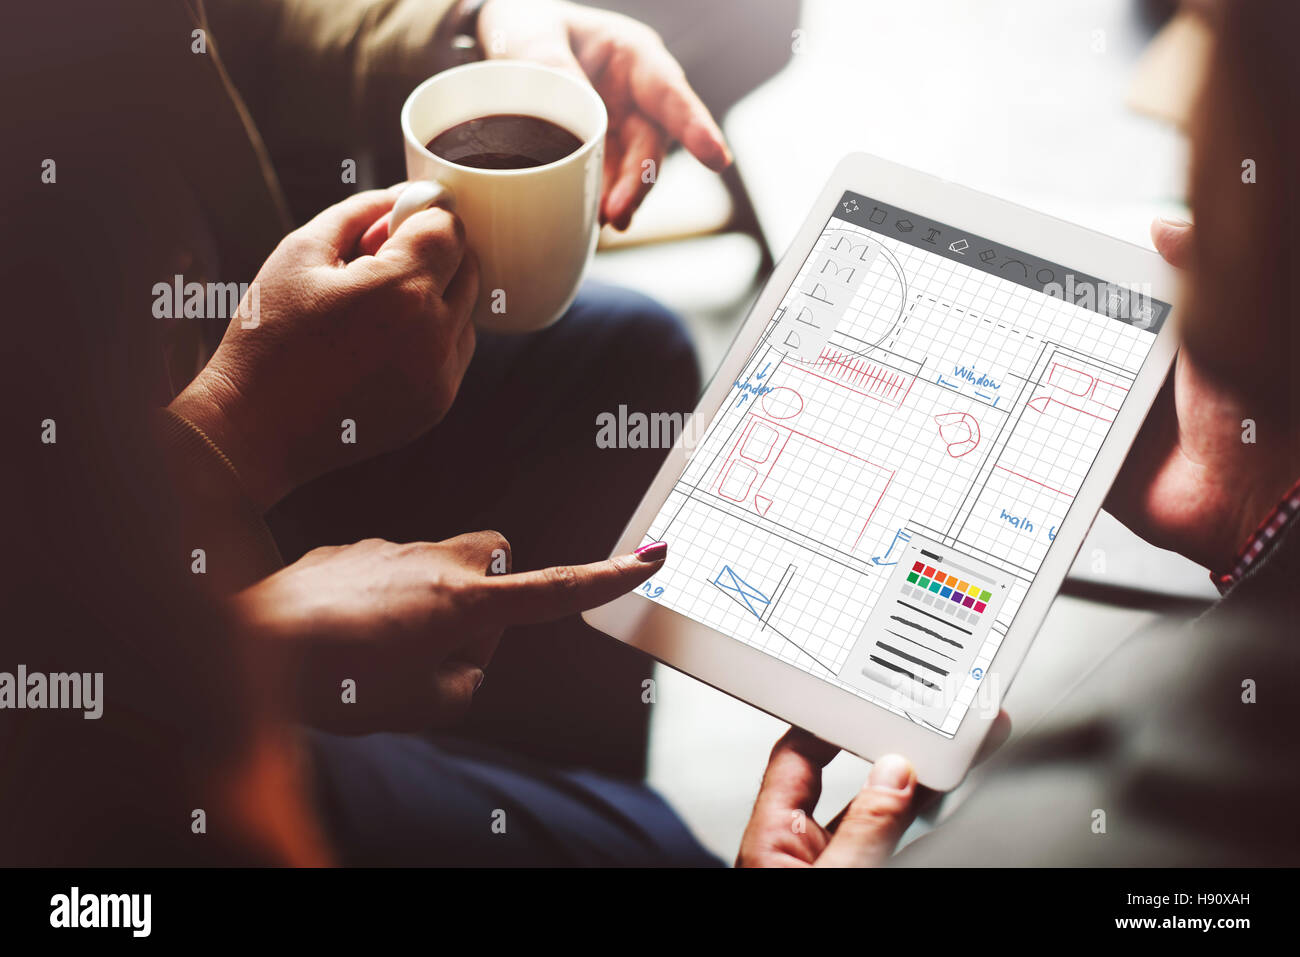 Architecture Blueprint Desing Engineering Structure Concept Stock Photo